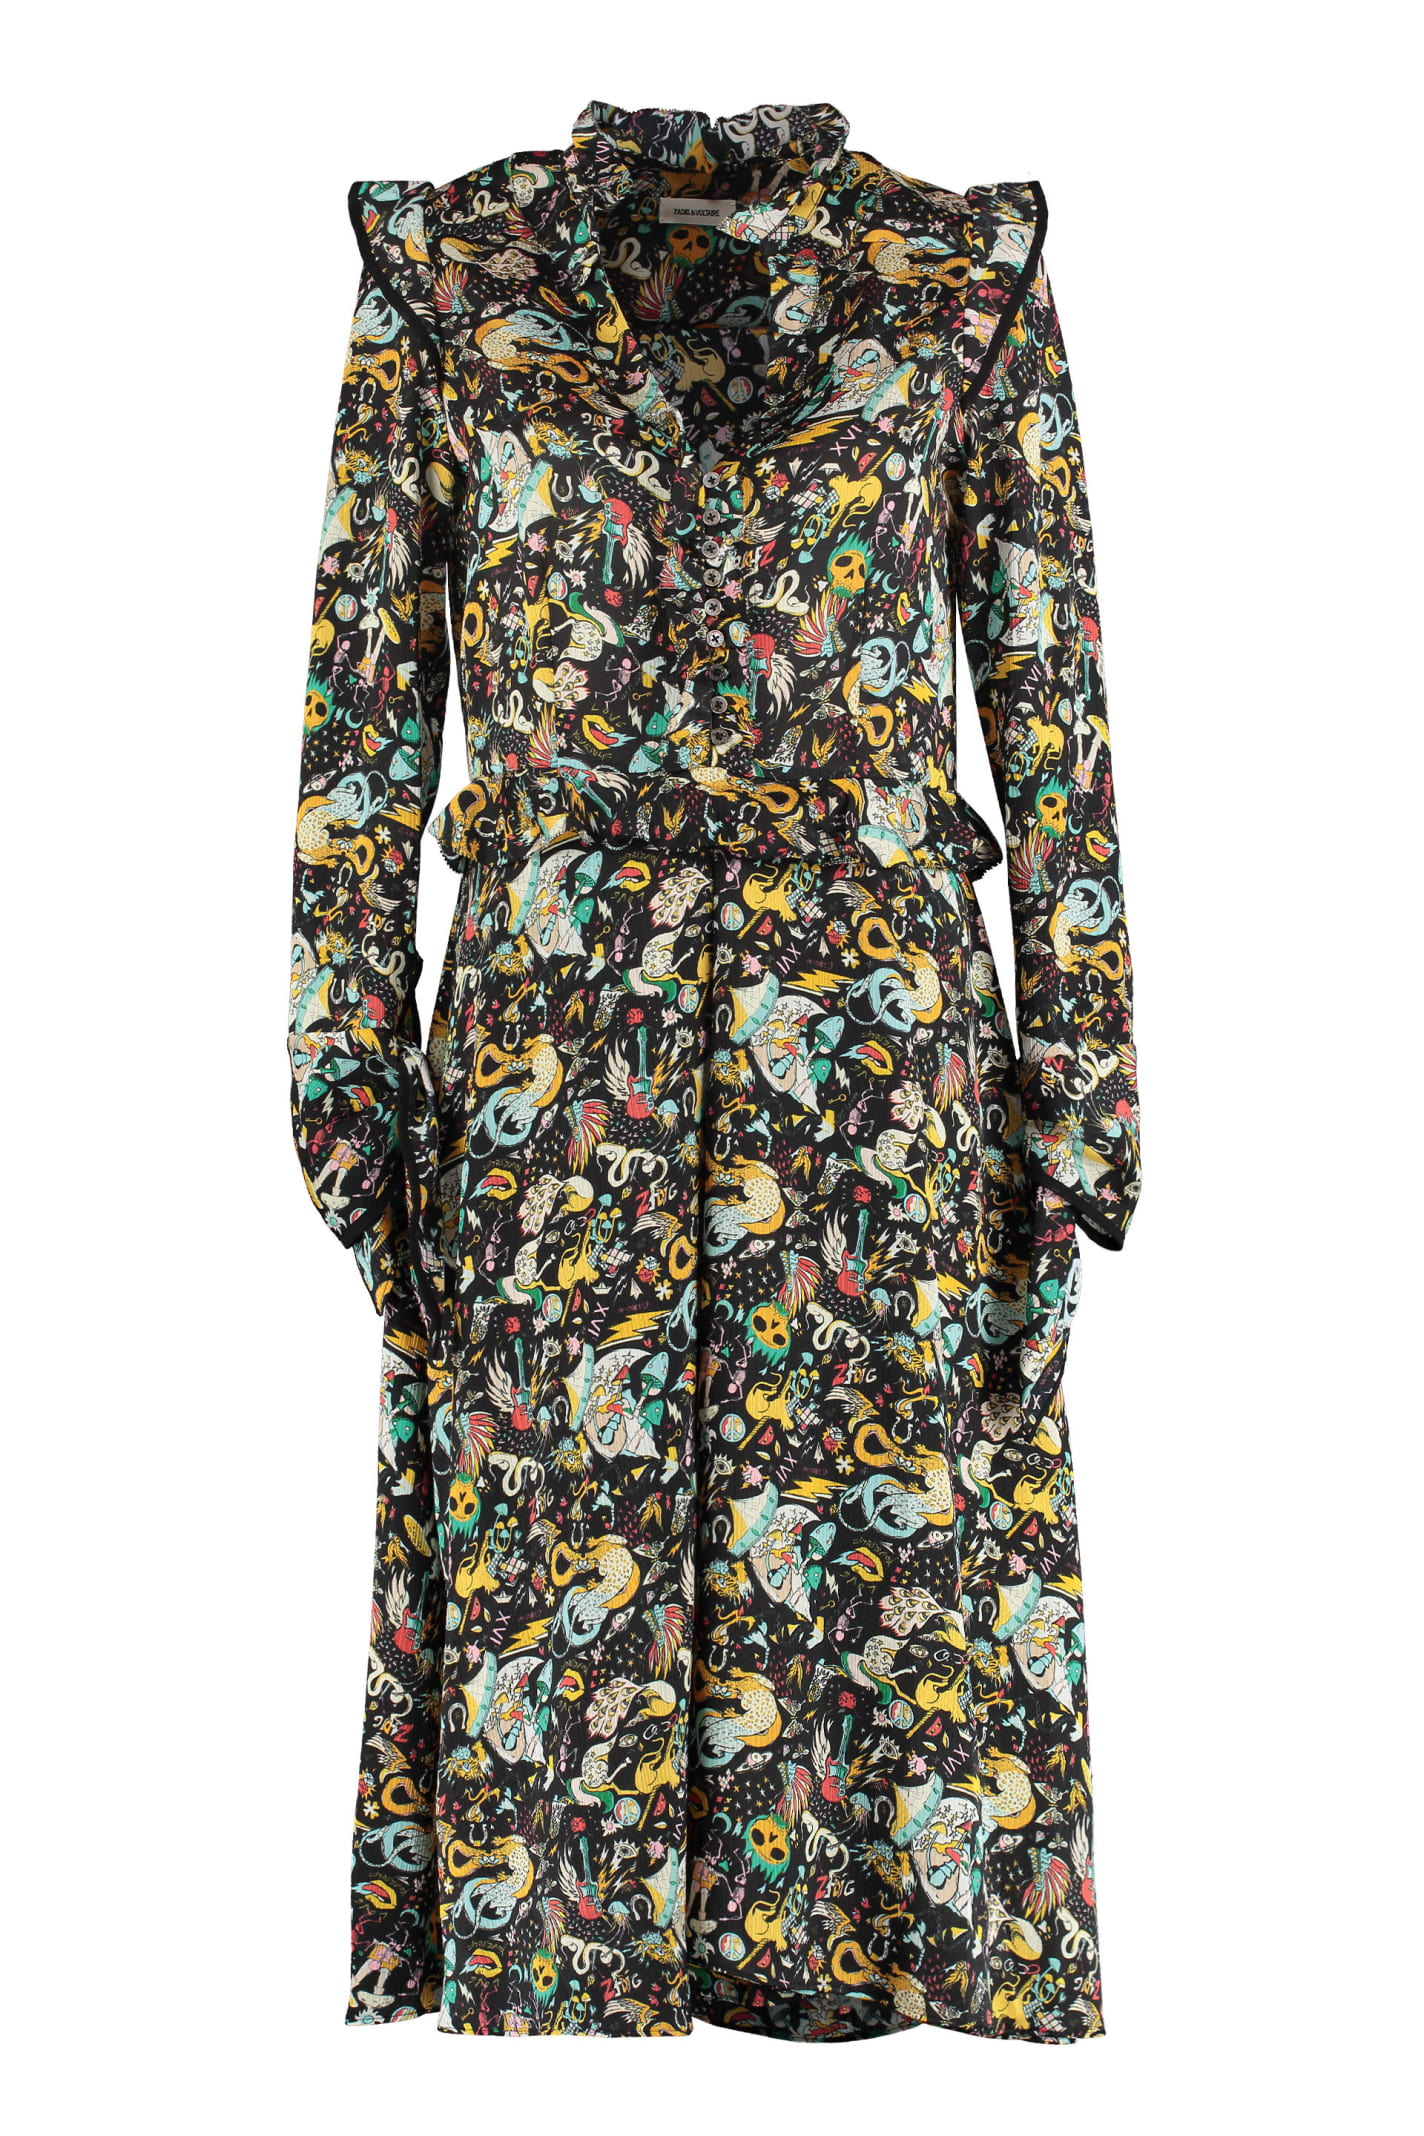 Zadig & Voltaire Printed Shirtdress